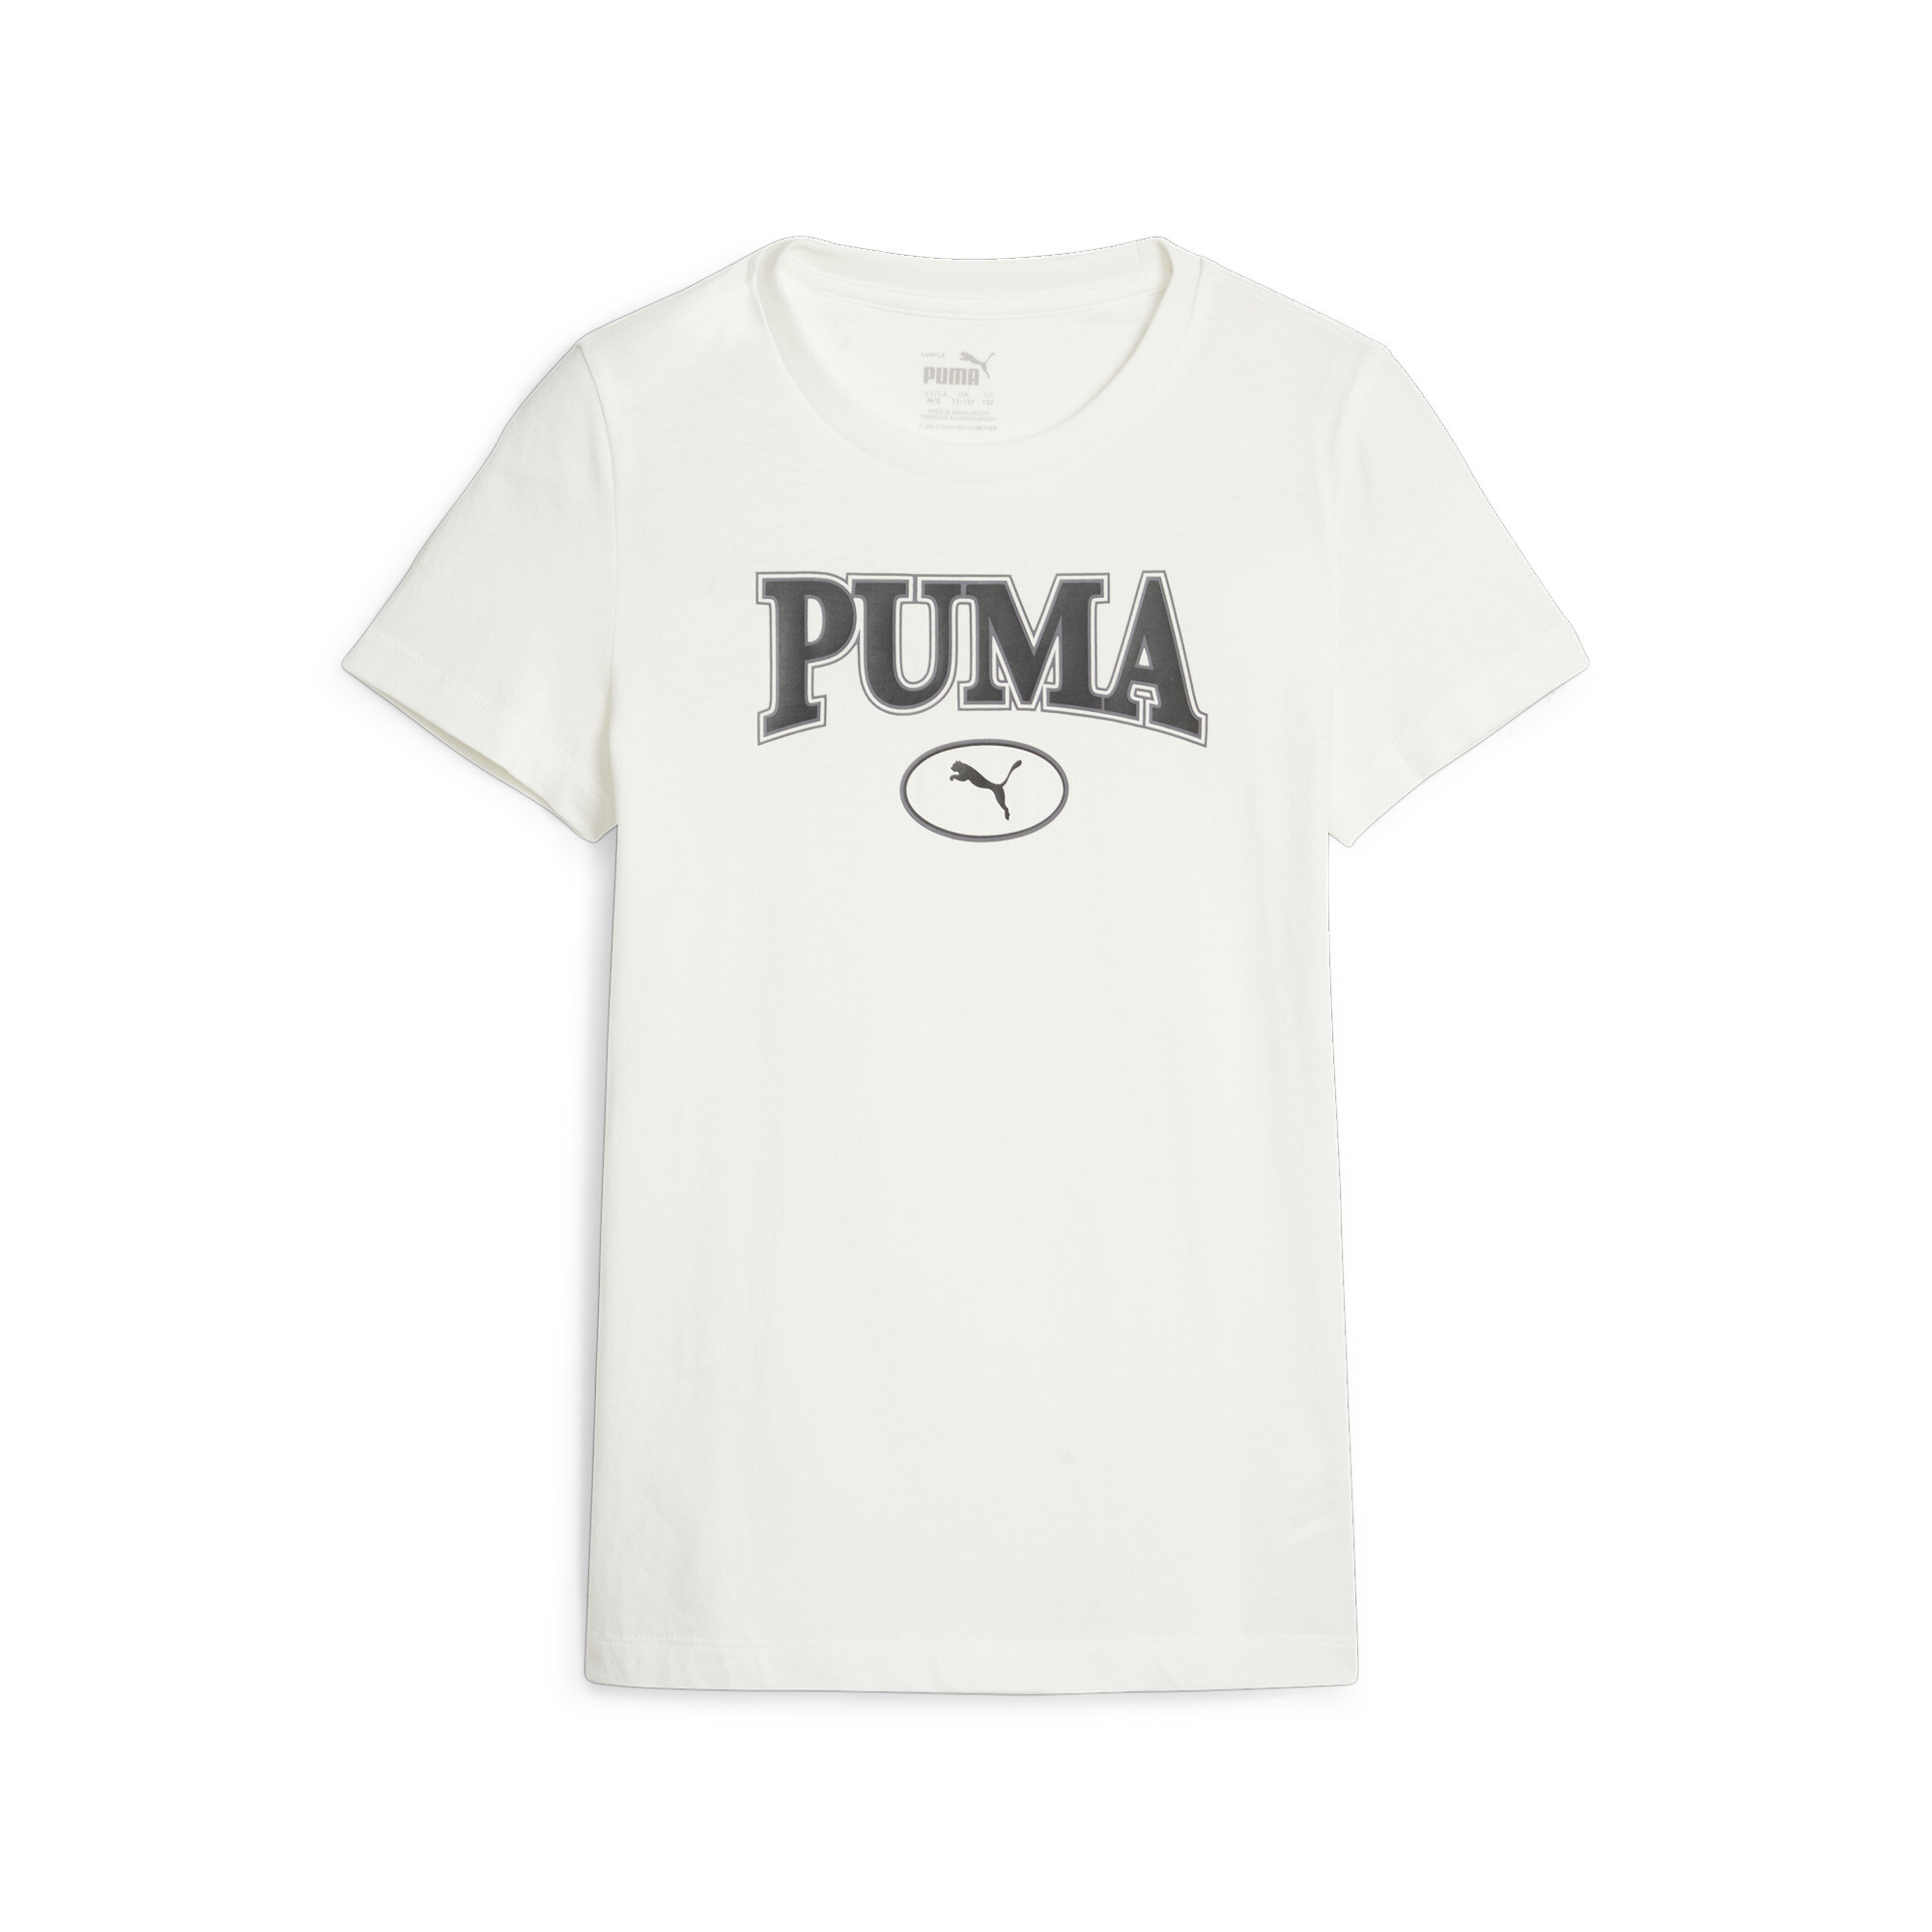 PUMA SQUAD Graphic T-Shirt In White, Size 11-12 Youth